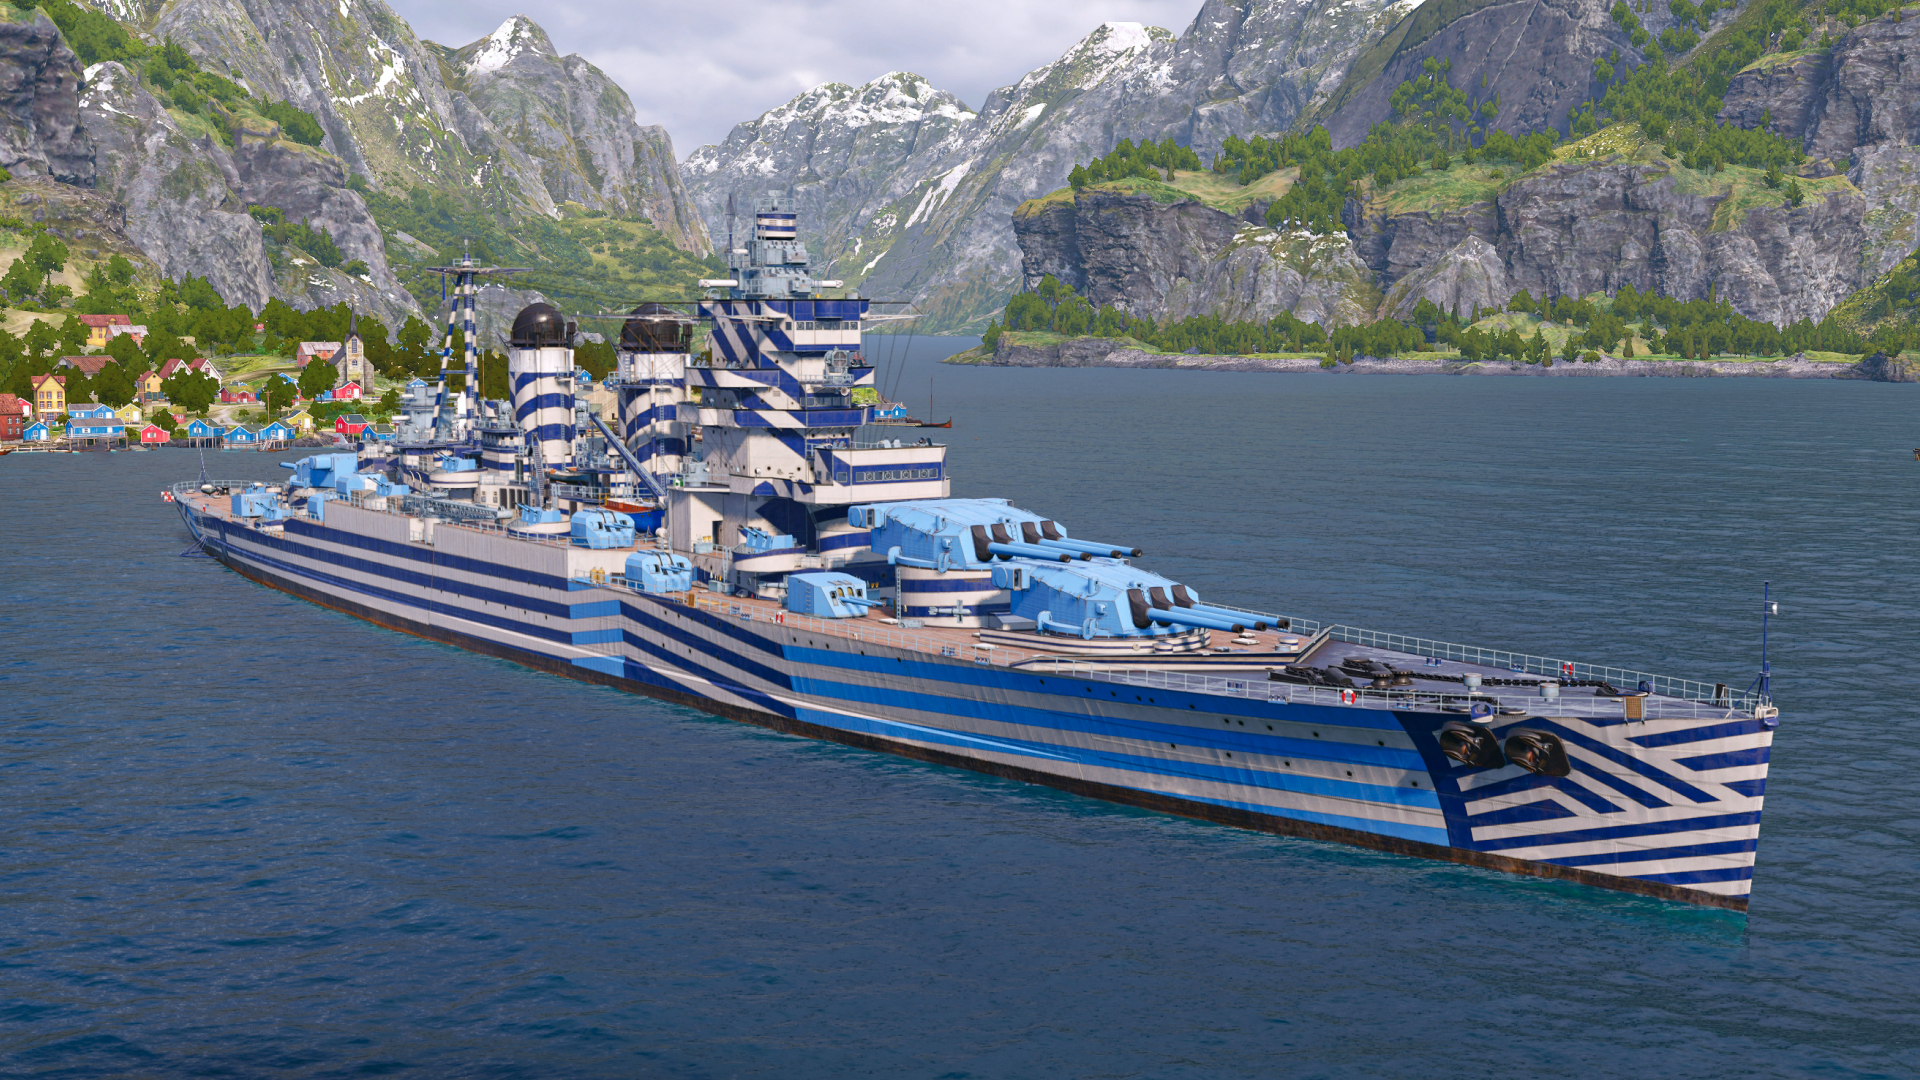 new -World-of-Warships-Legends